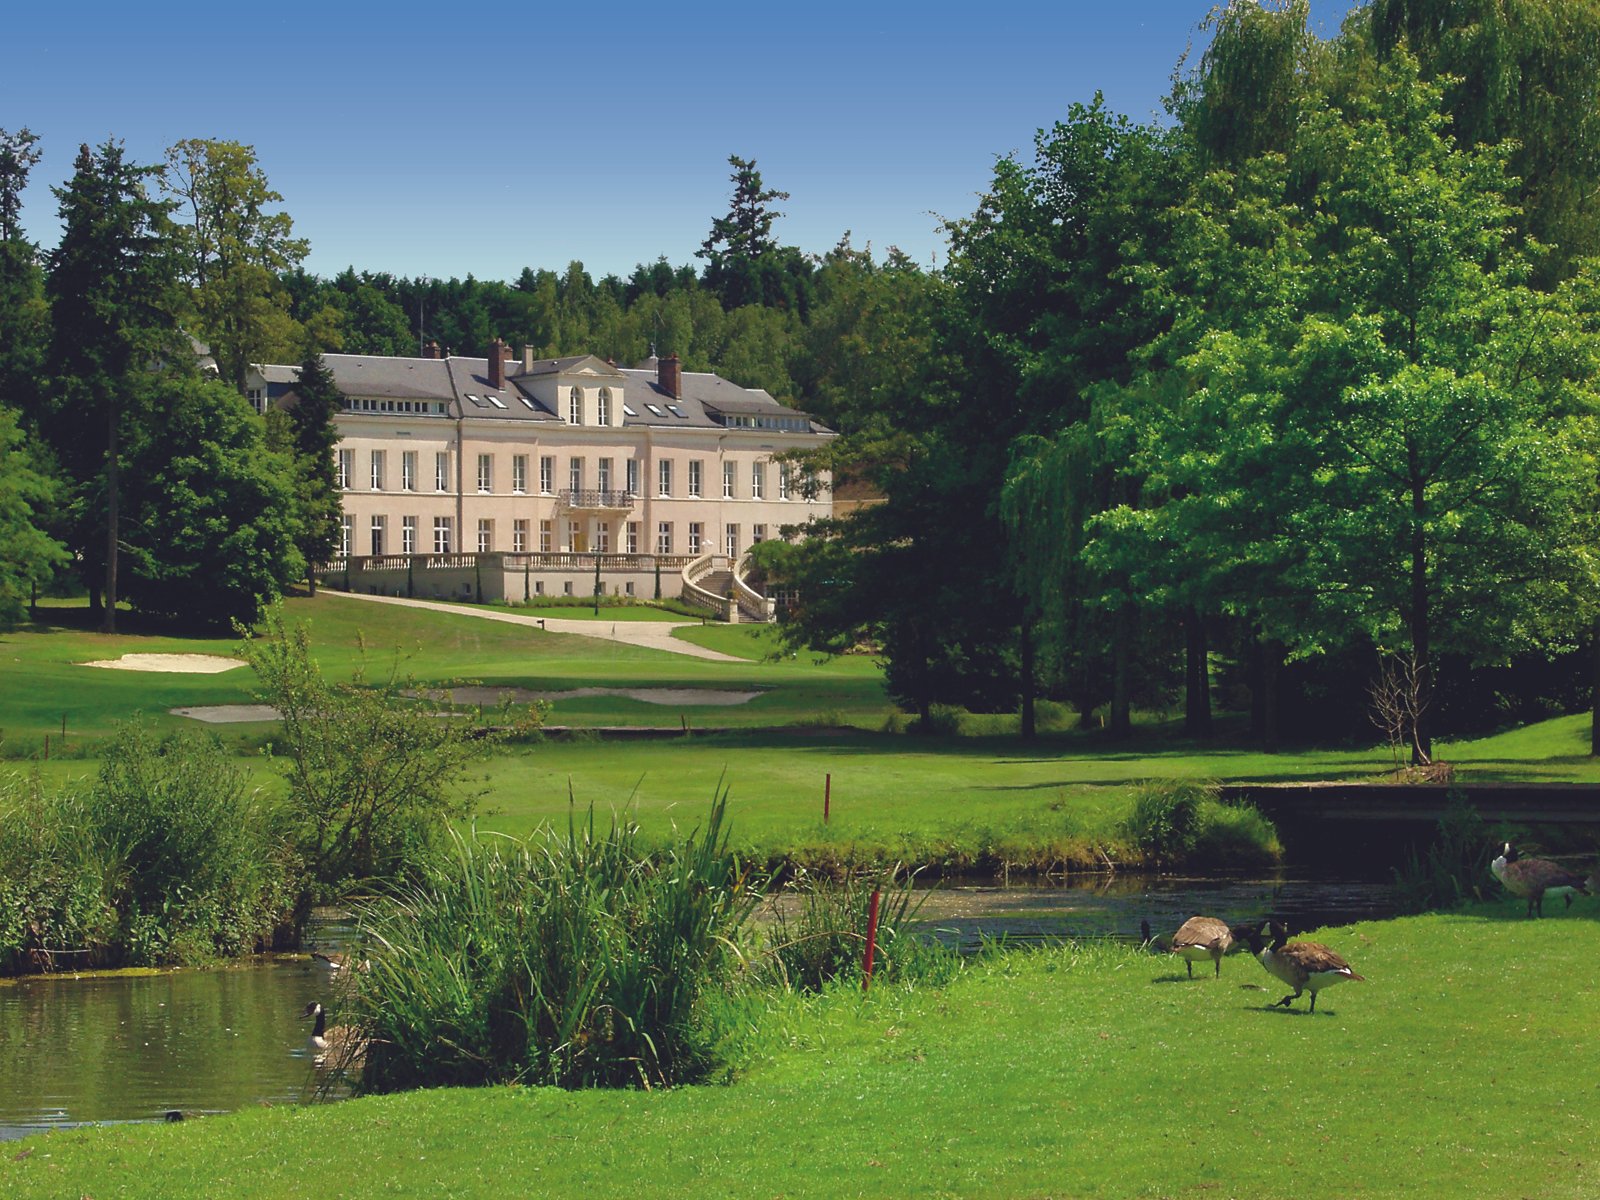 Domaine de Vaugouard | 4 star hôtel, gourmet restaurant, golf course, swimming pool | In the Loiret, 35 minutes from Fontainebleau, France